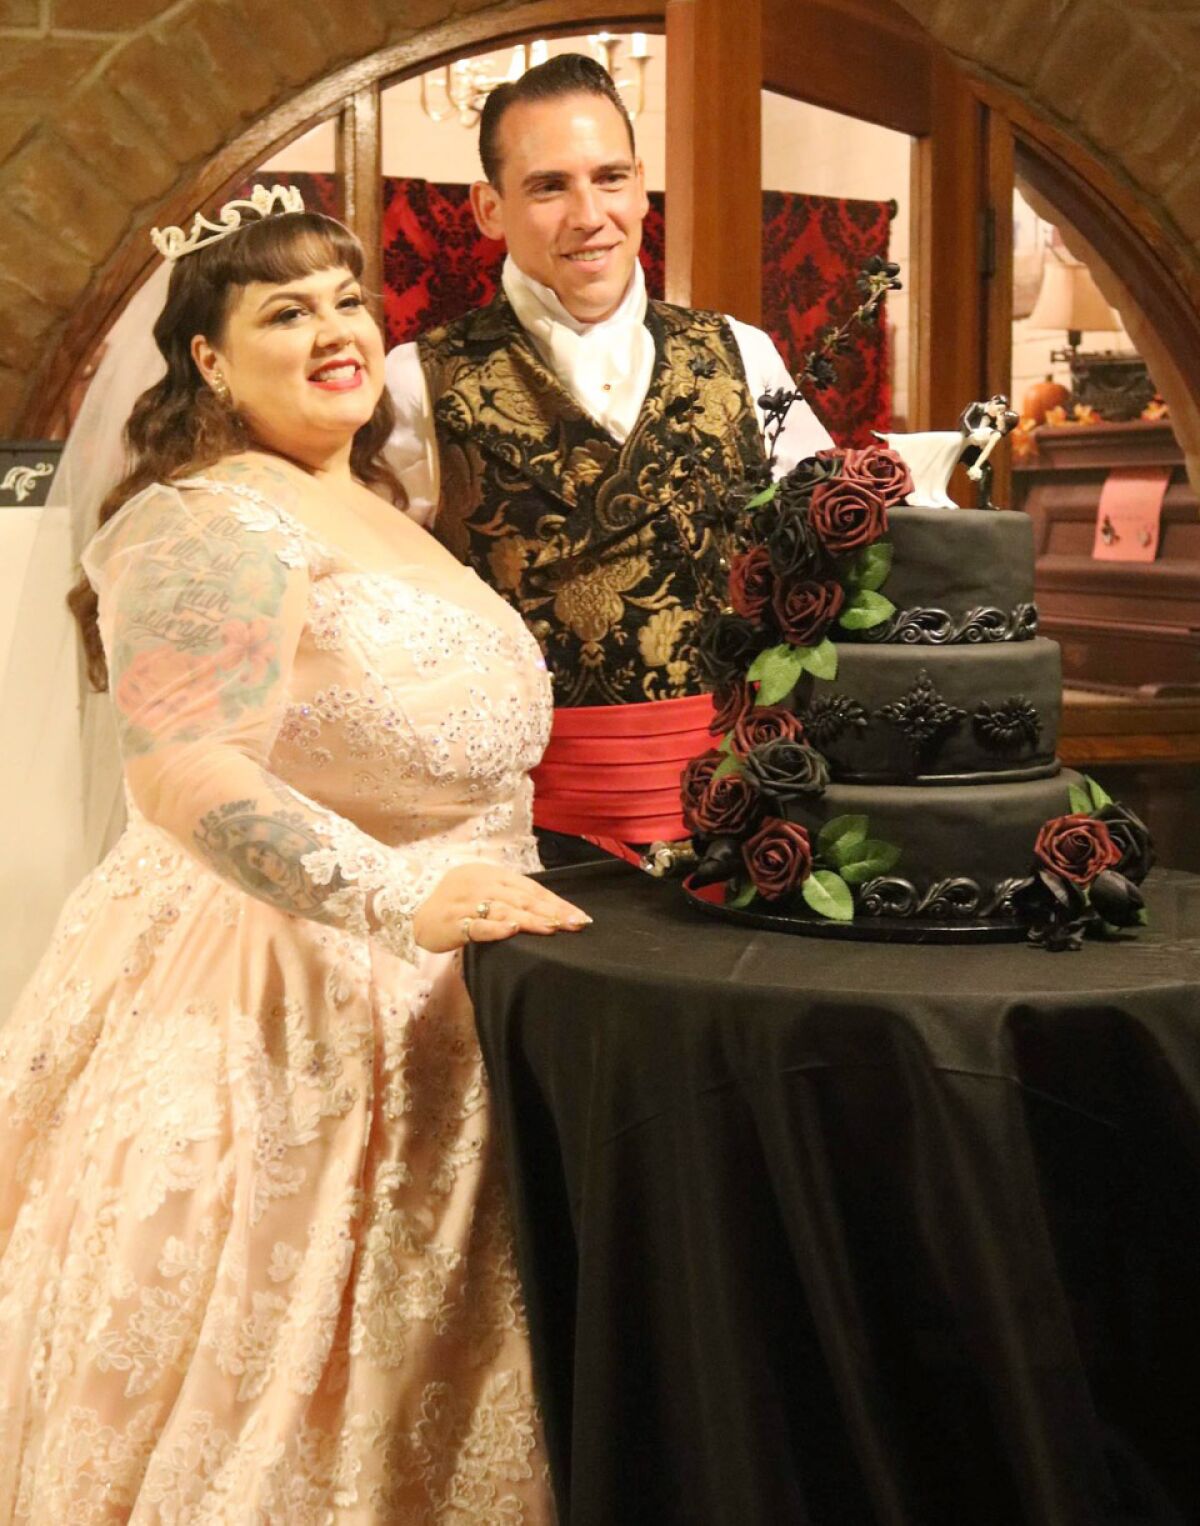 Krystine and Garrett Wear celebrated their wedding ceremony on October 29 with an elaborate black cake made by Alexis Henshaw.